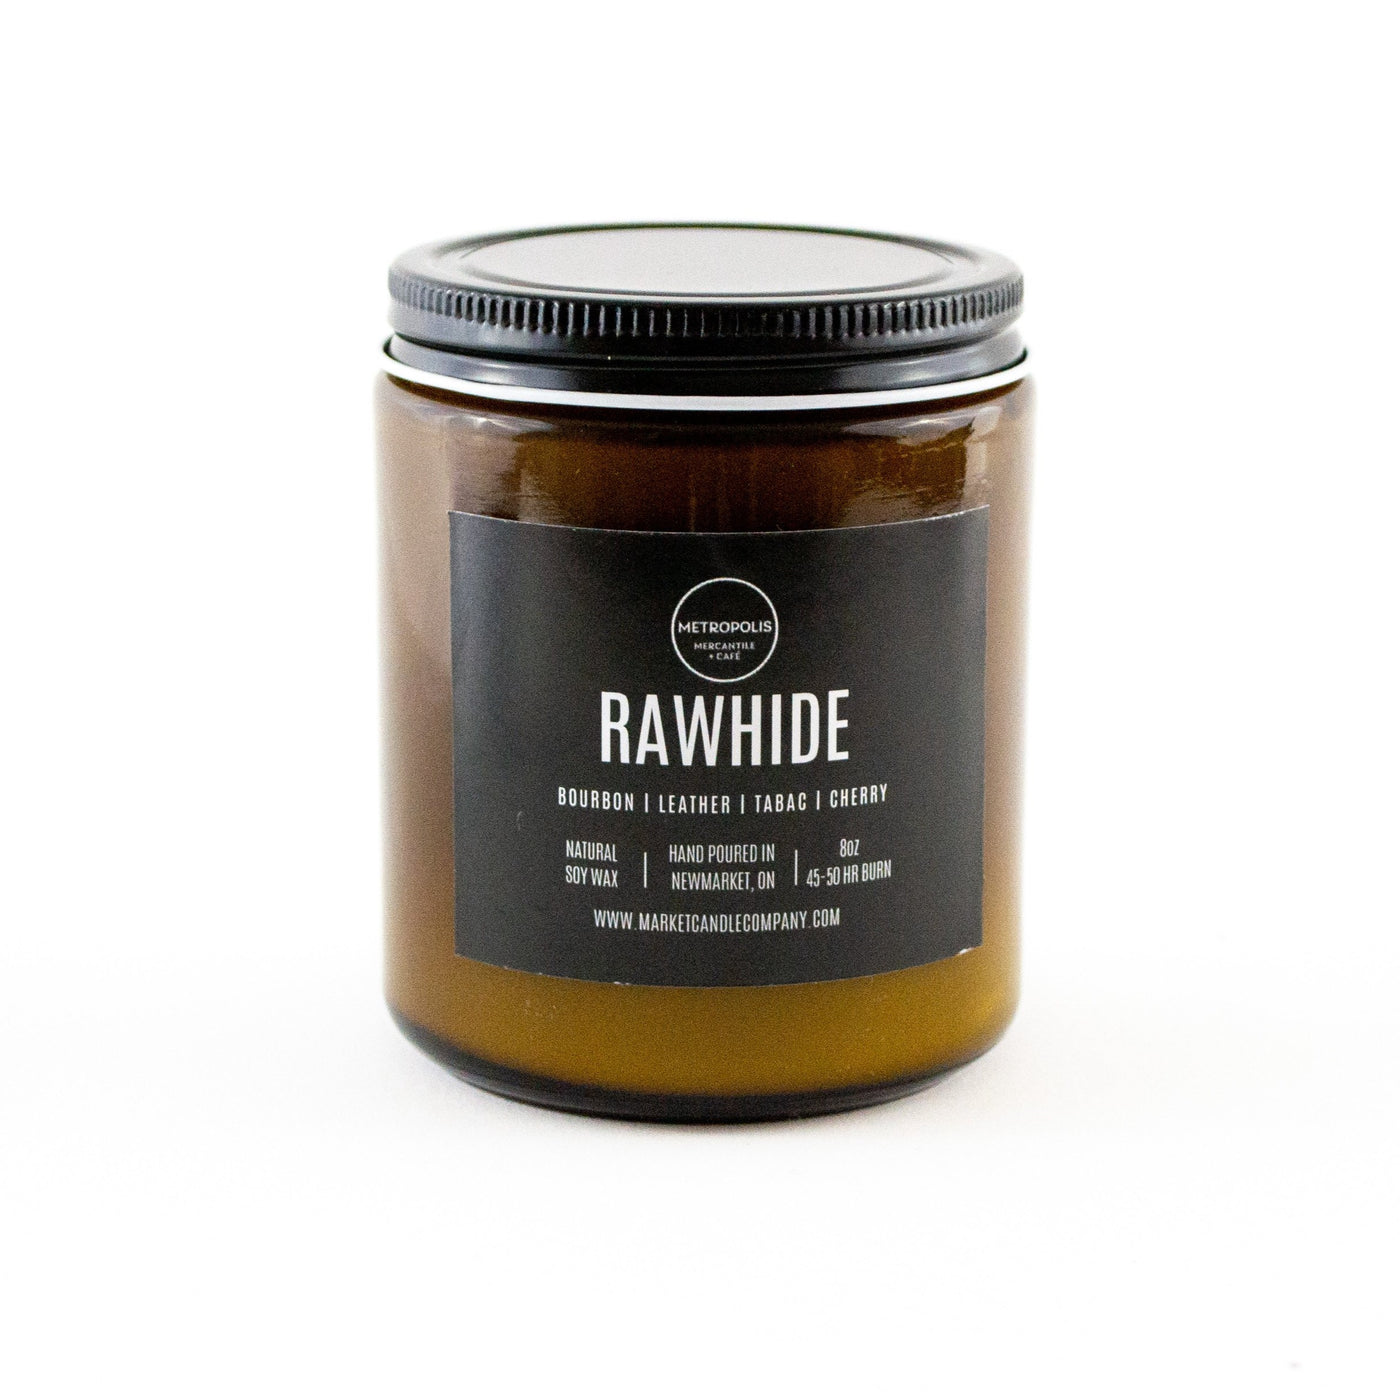 Rawhide Candle - Market Candle Company